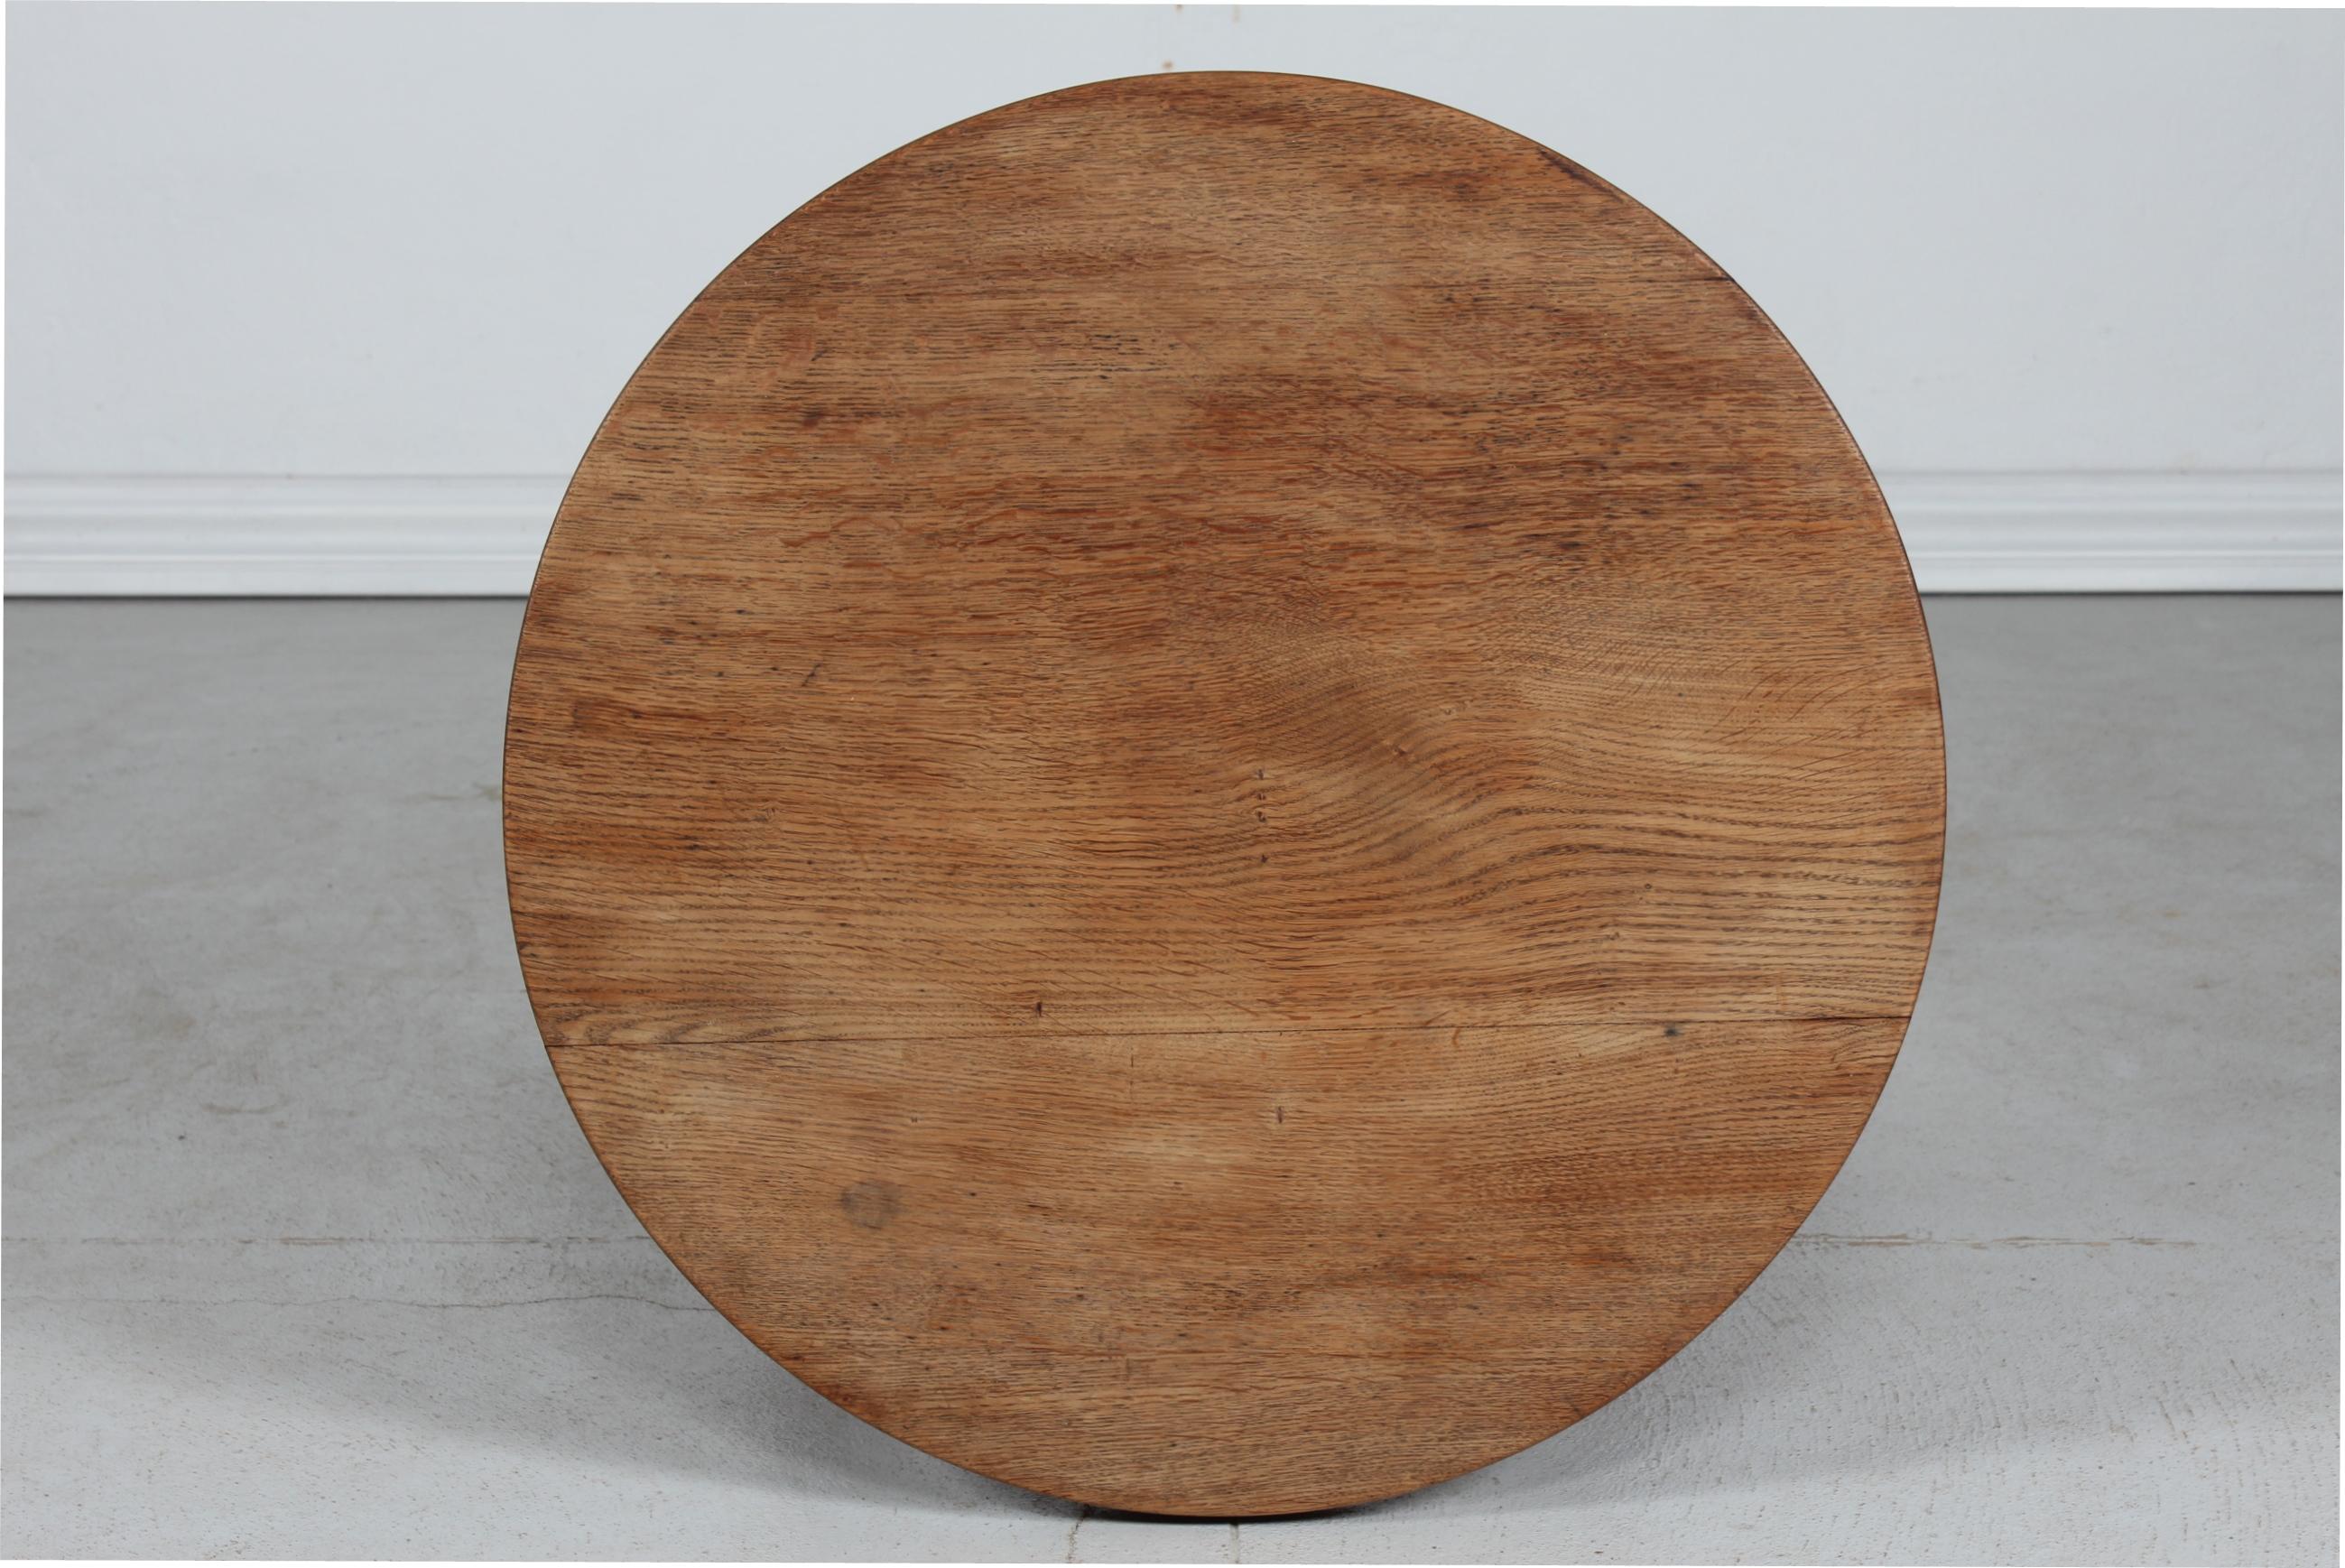 Danish Midcentury Brutalist Round Coffee Table of Solid Oak by Cabinetmaker 1950 For Sale 3